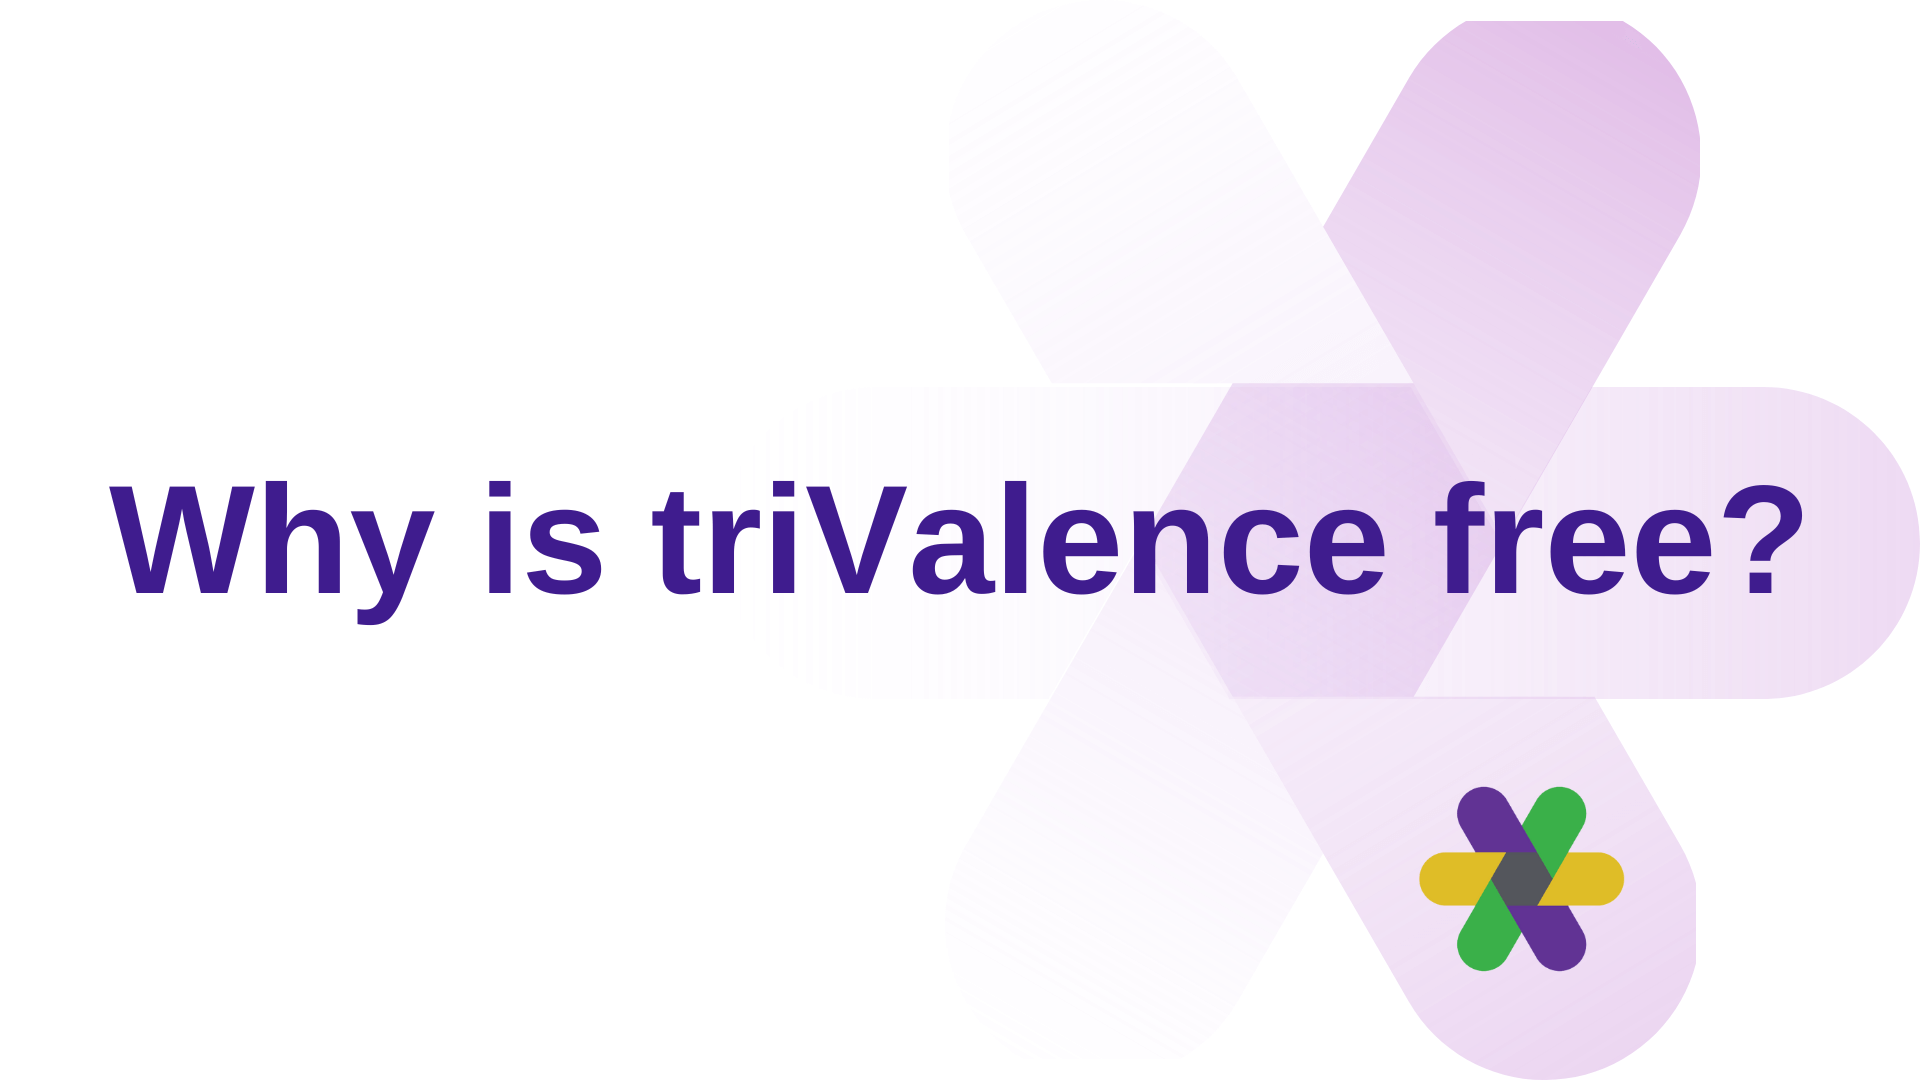 Why is triValence free?